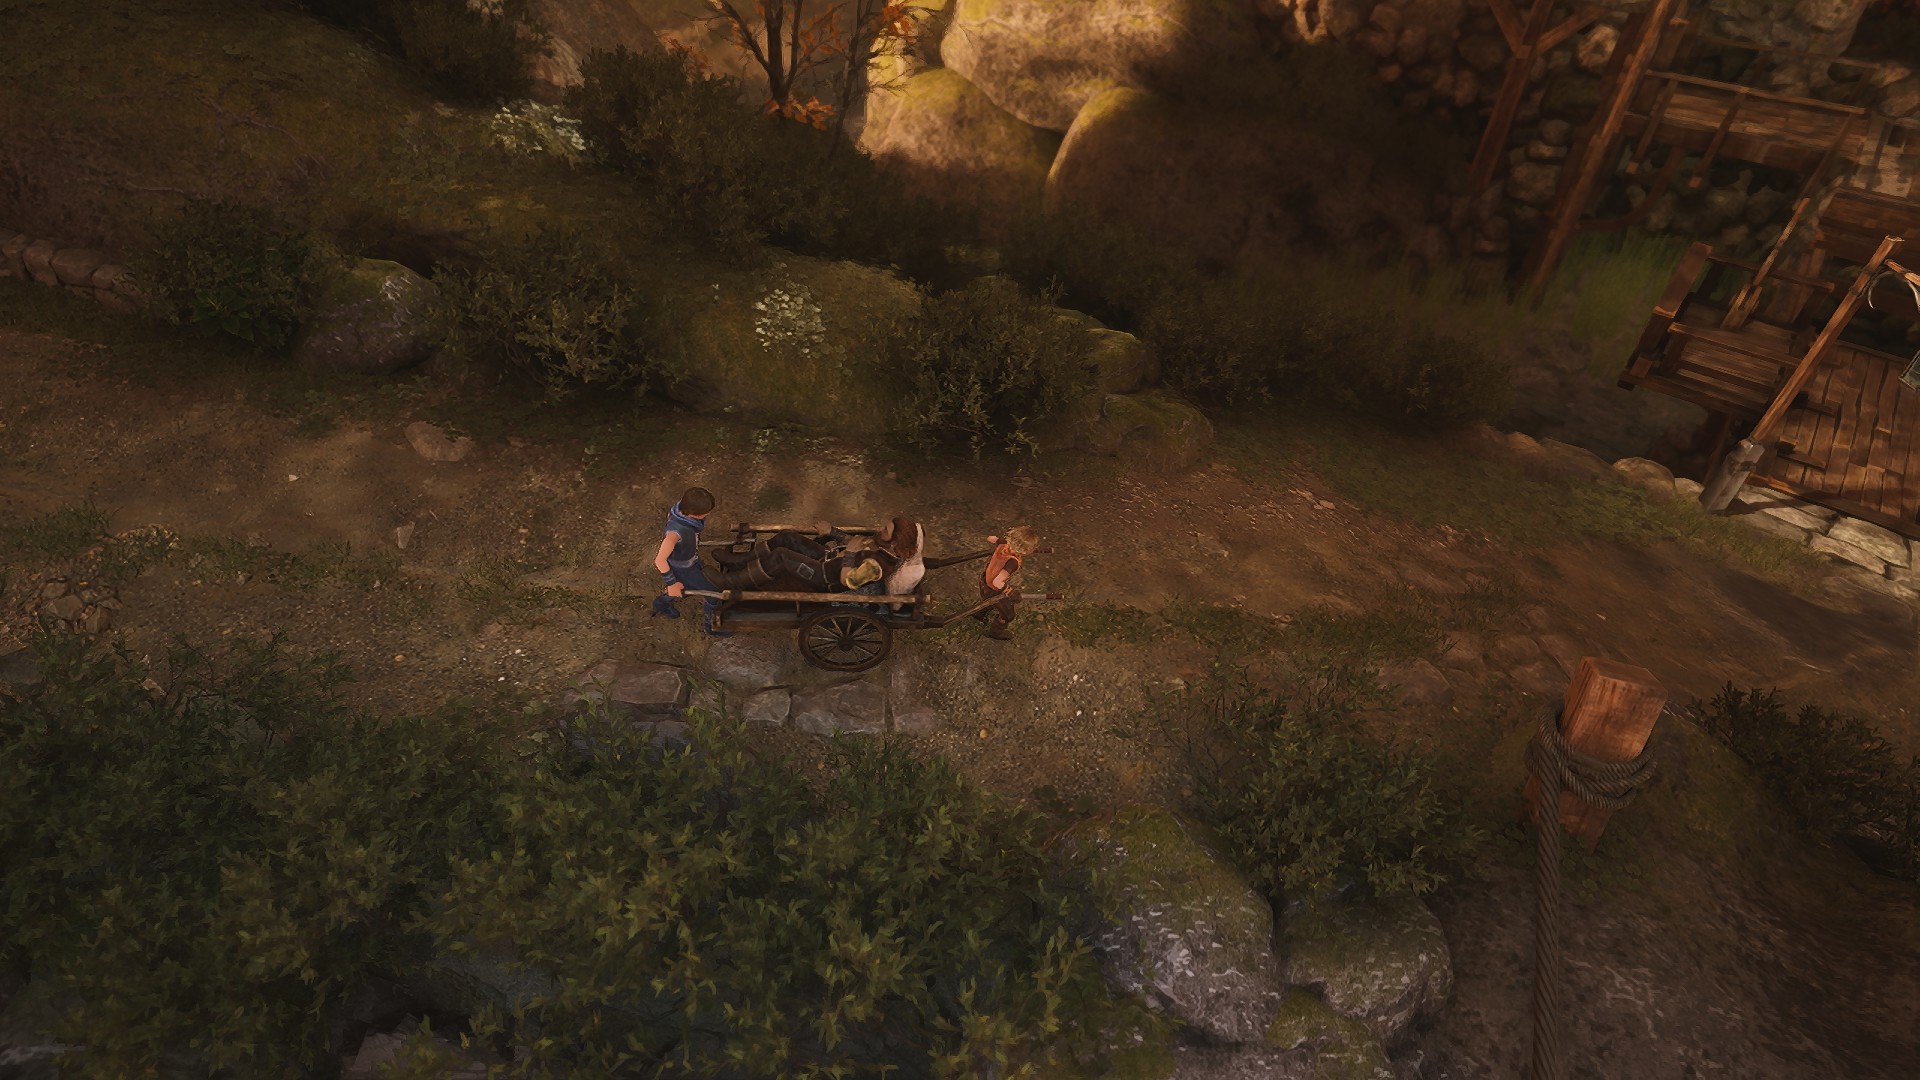 The two brothers carrying their ill father in a cart in Brothers: A Tale of Two Sons.